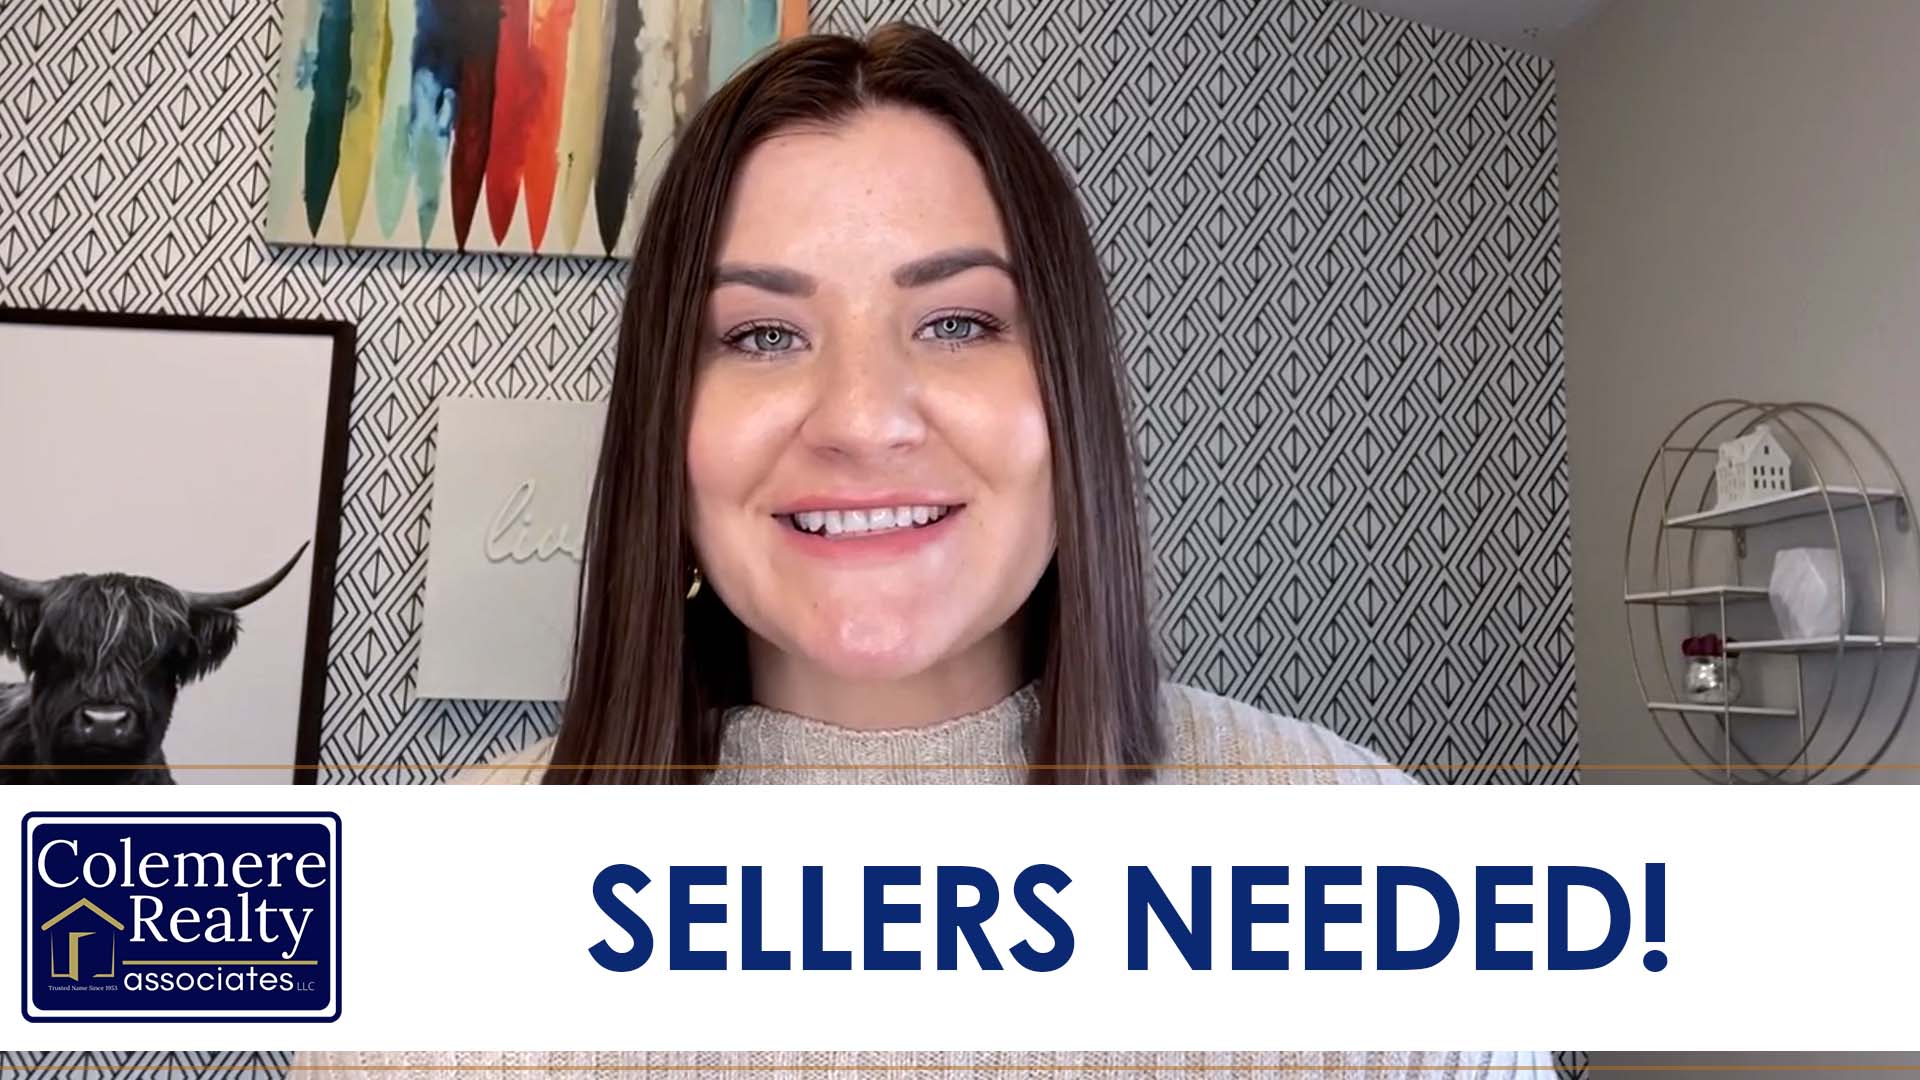 We’re Desperate for Sellers